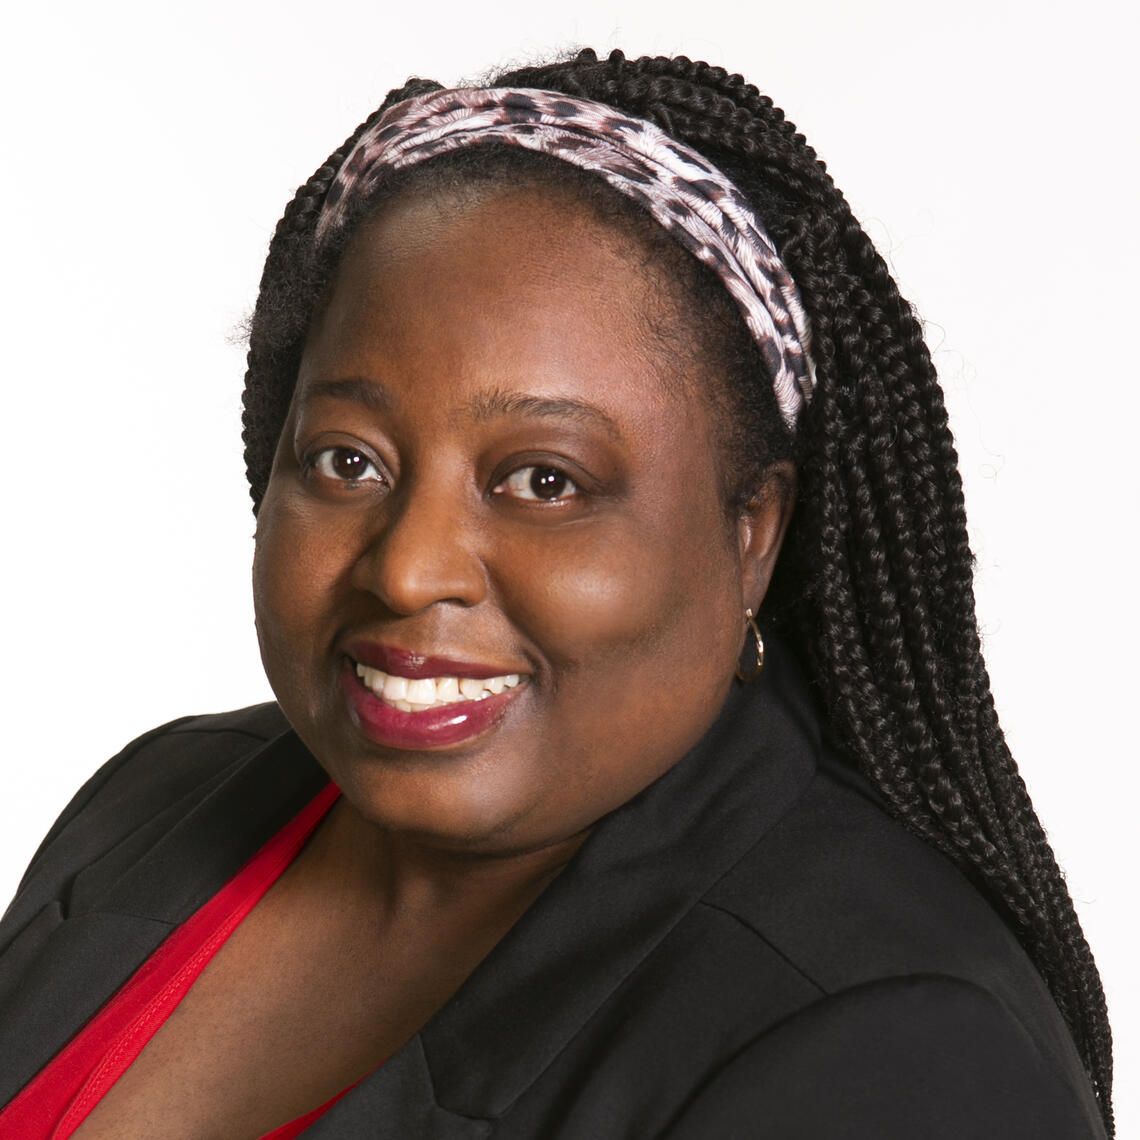 Oluwabukola Salami, Health Research Foundation of Innovative Medicines Canada, Diversity & Equity in Research Award and American Academy of Nursing, Inductee